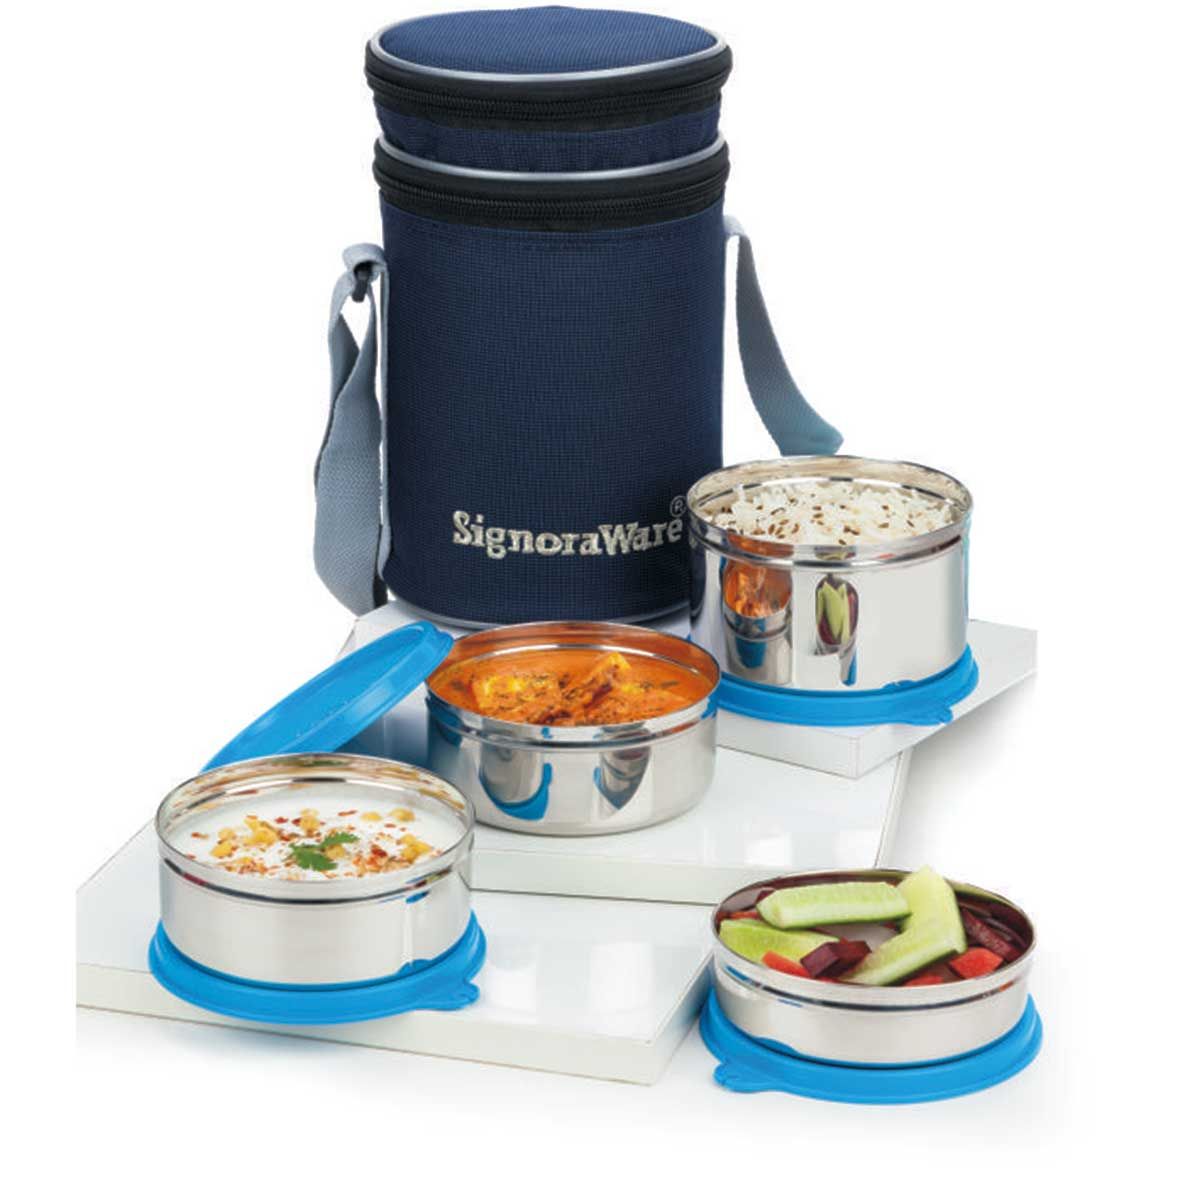 Signoraware Executive Steel Big Lunch Box (4cont with bag set) - 3501